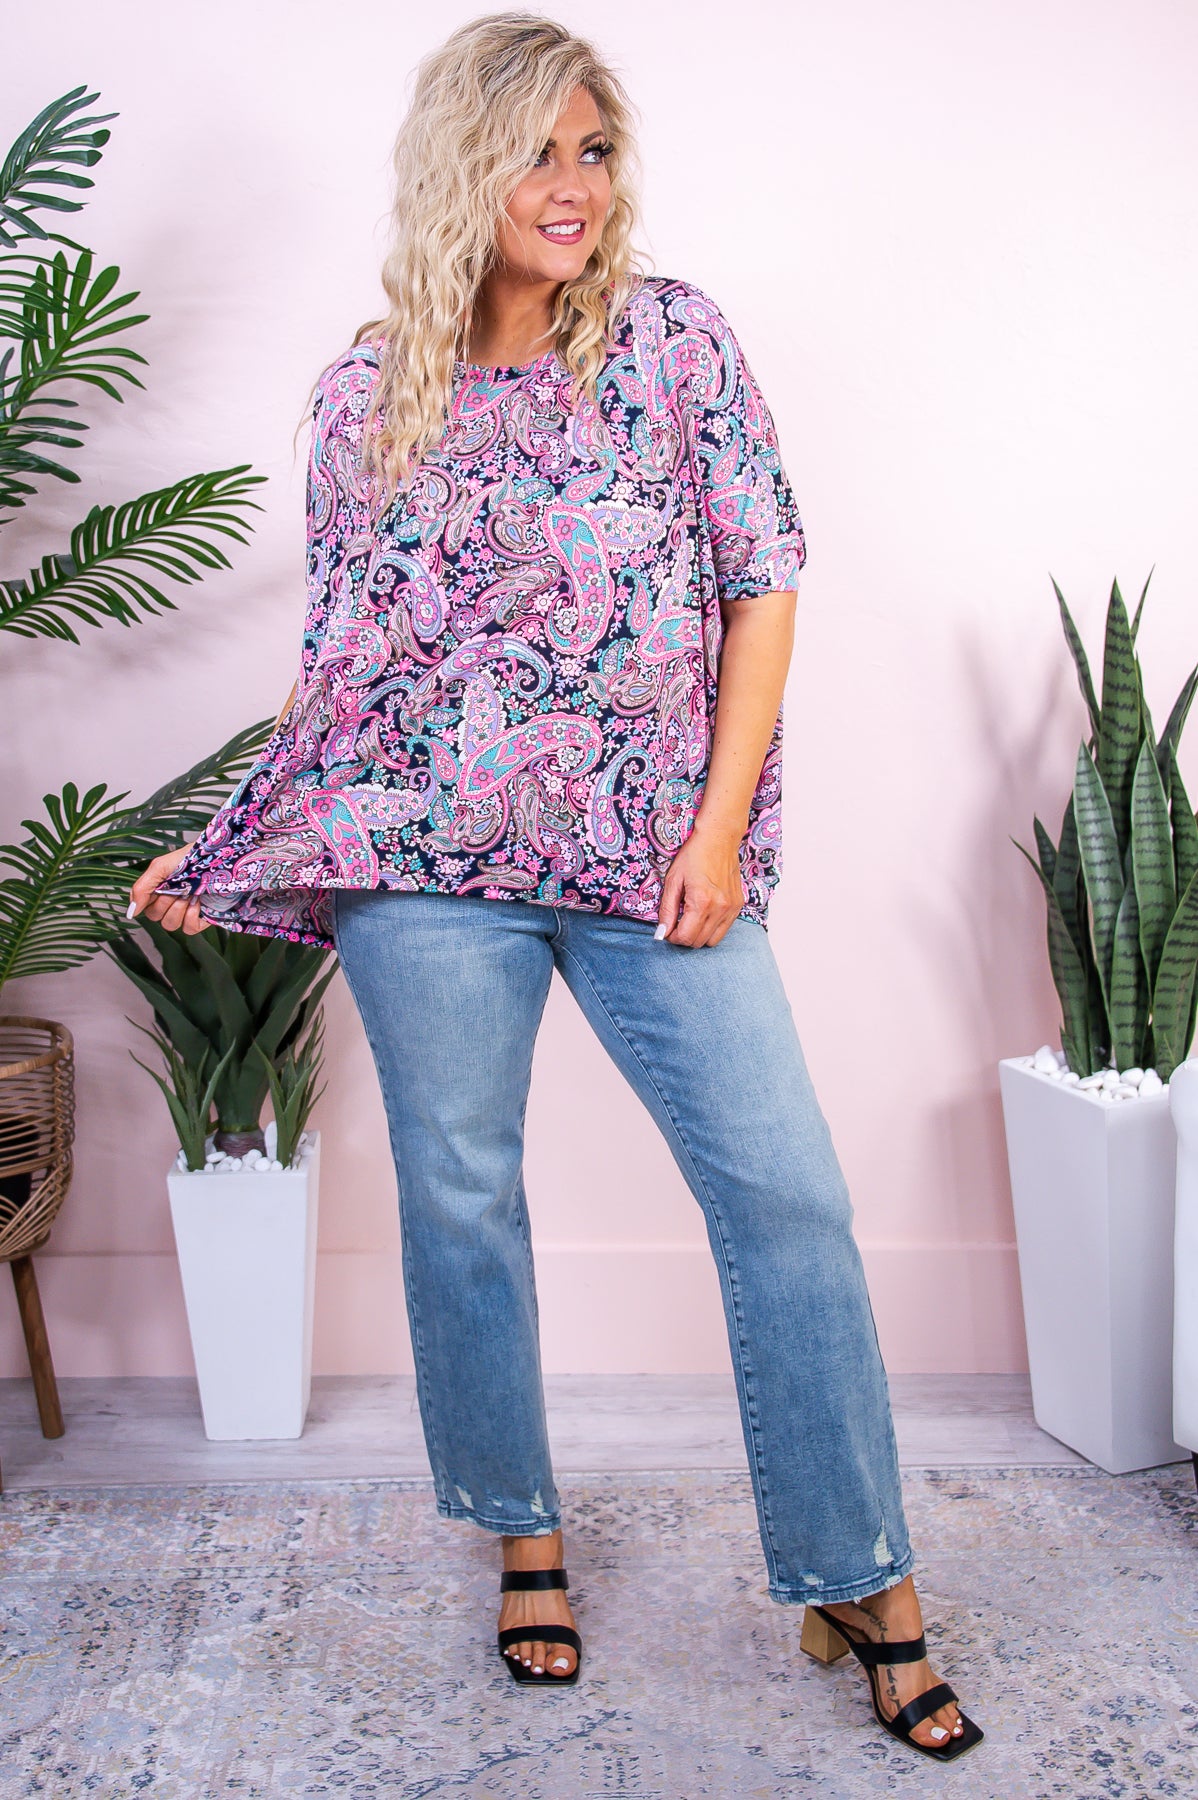 Stylish Mentality Navy/Pink Floral Paisley Top - T9705NV